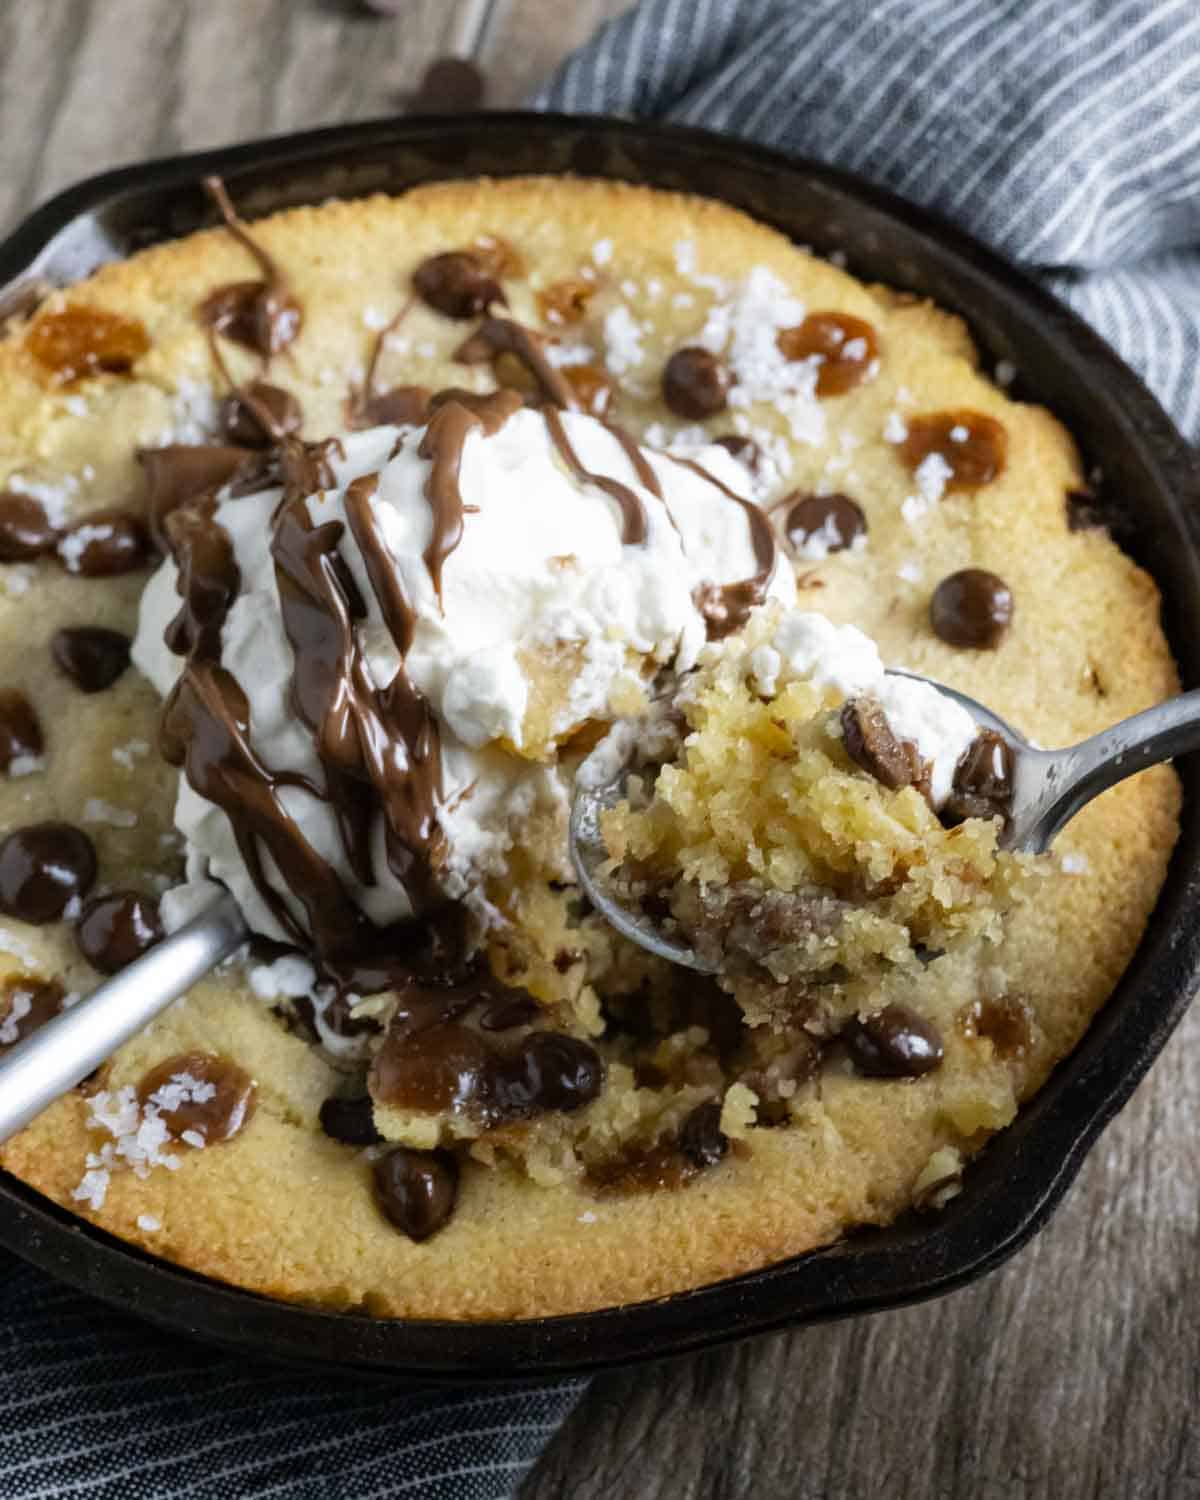 Chocolate chip skillet cookie topped with whipped cream and chocolate drizzle.